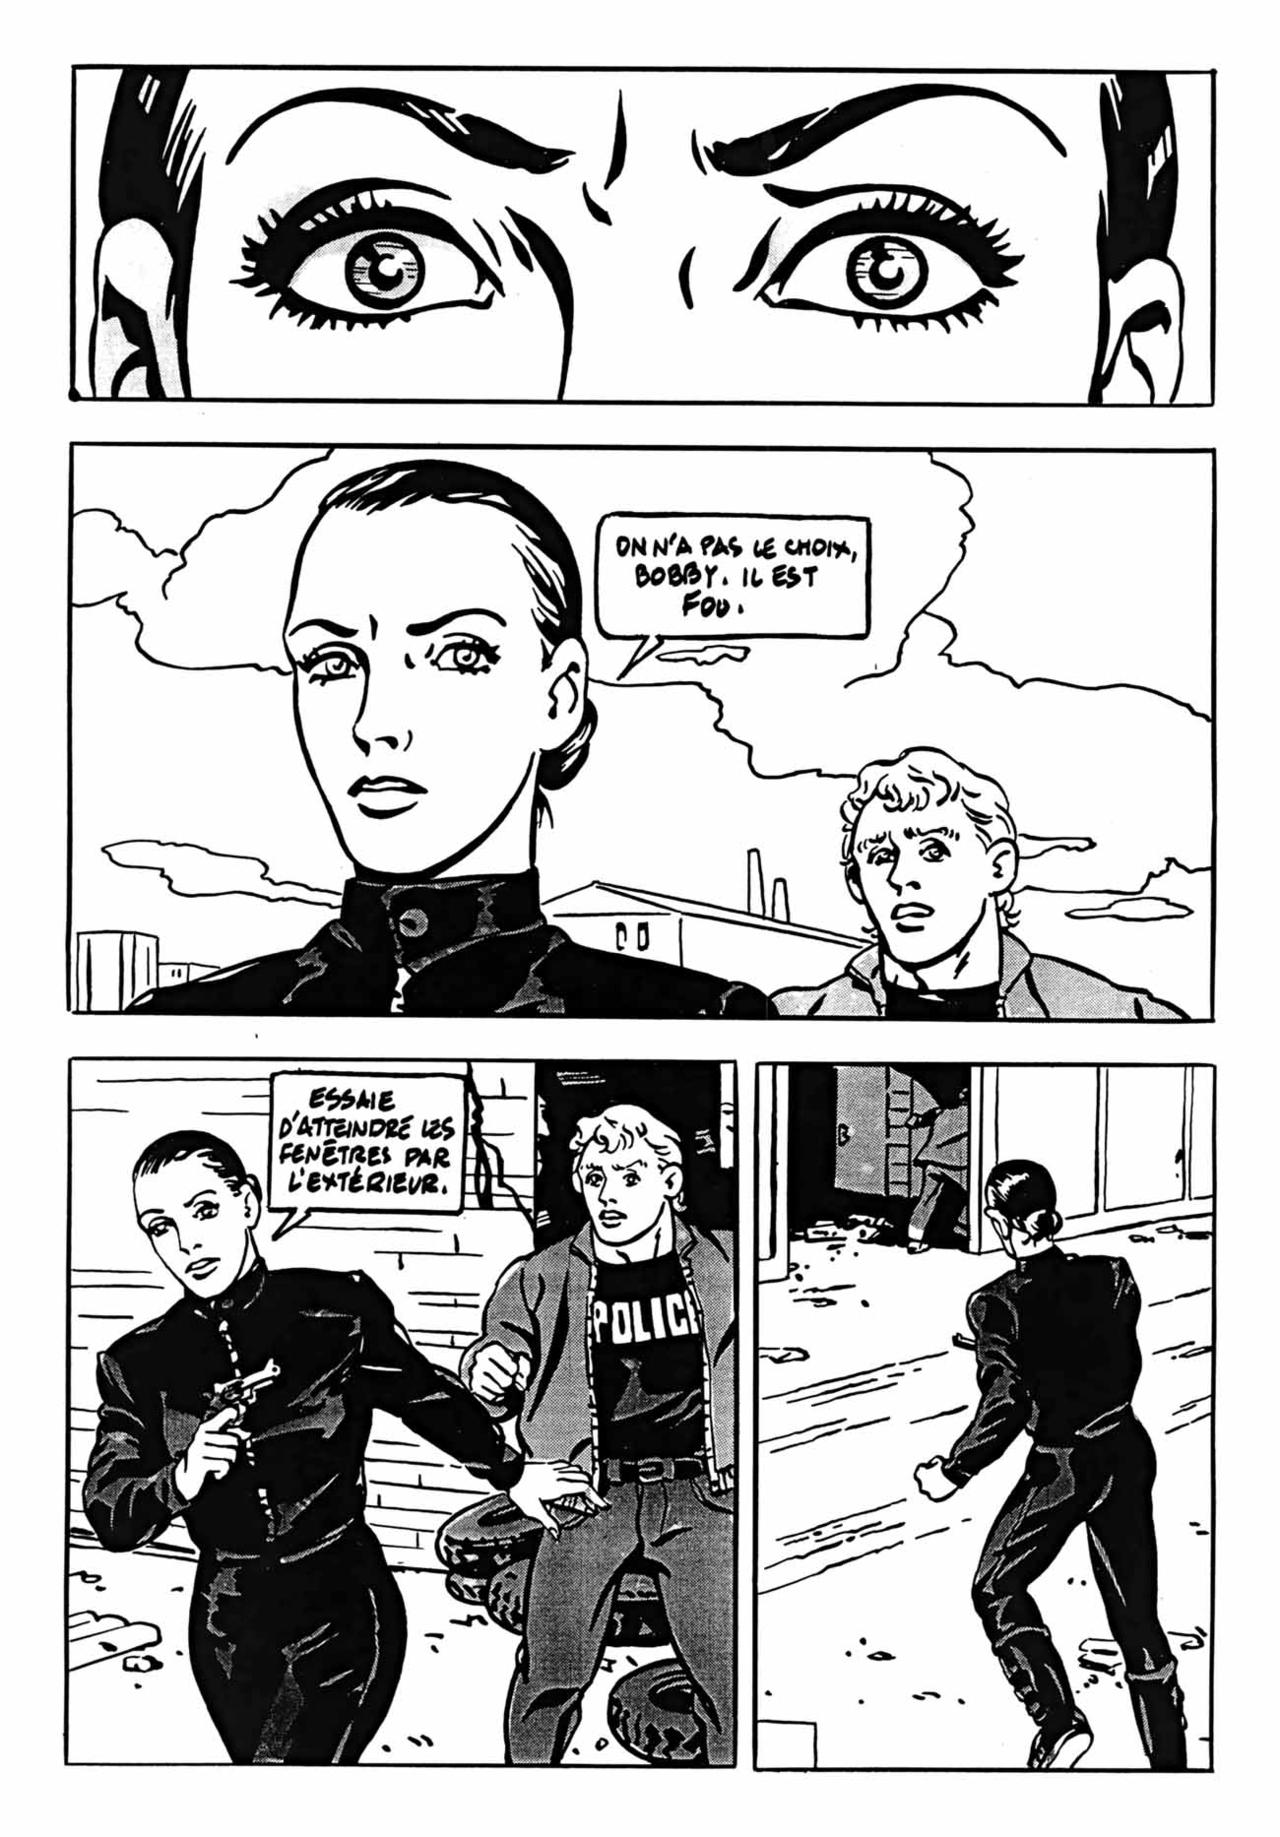 Police By Night - Volume 1 numero d'image 118